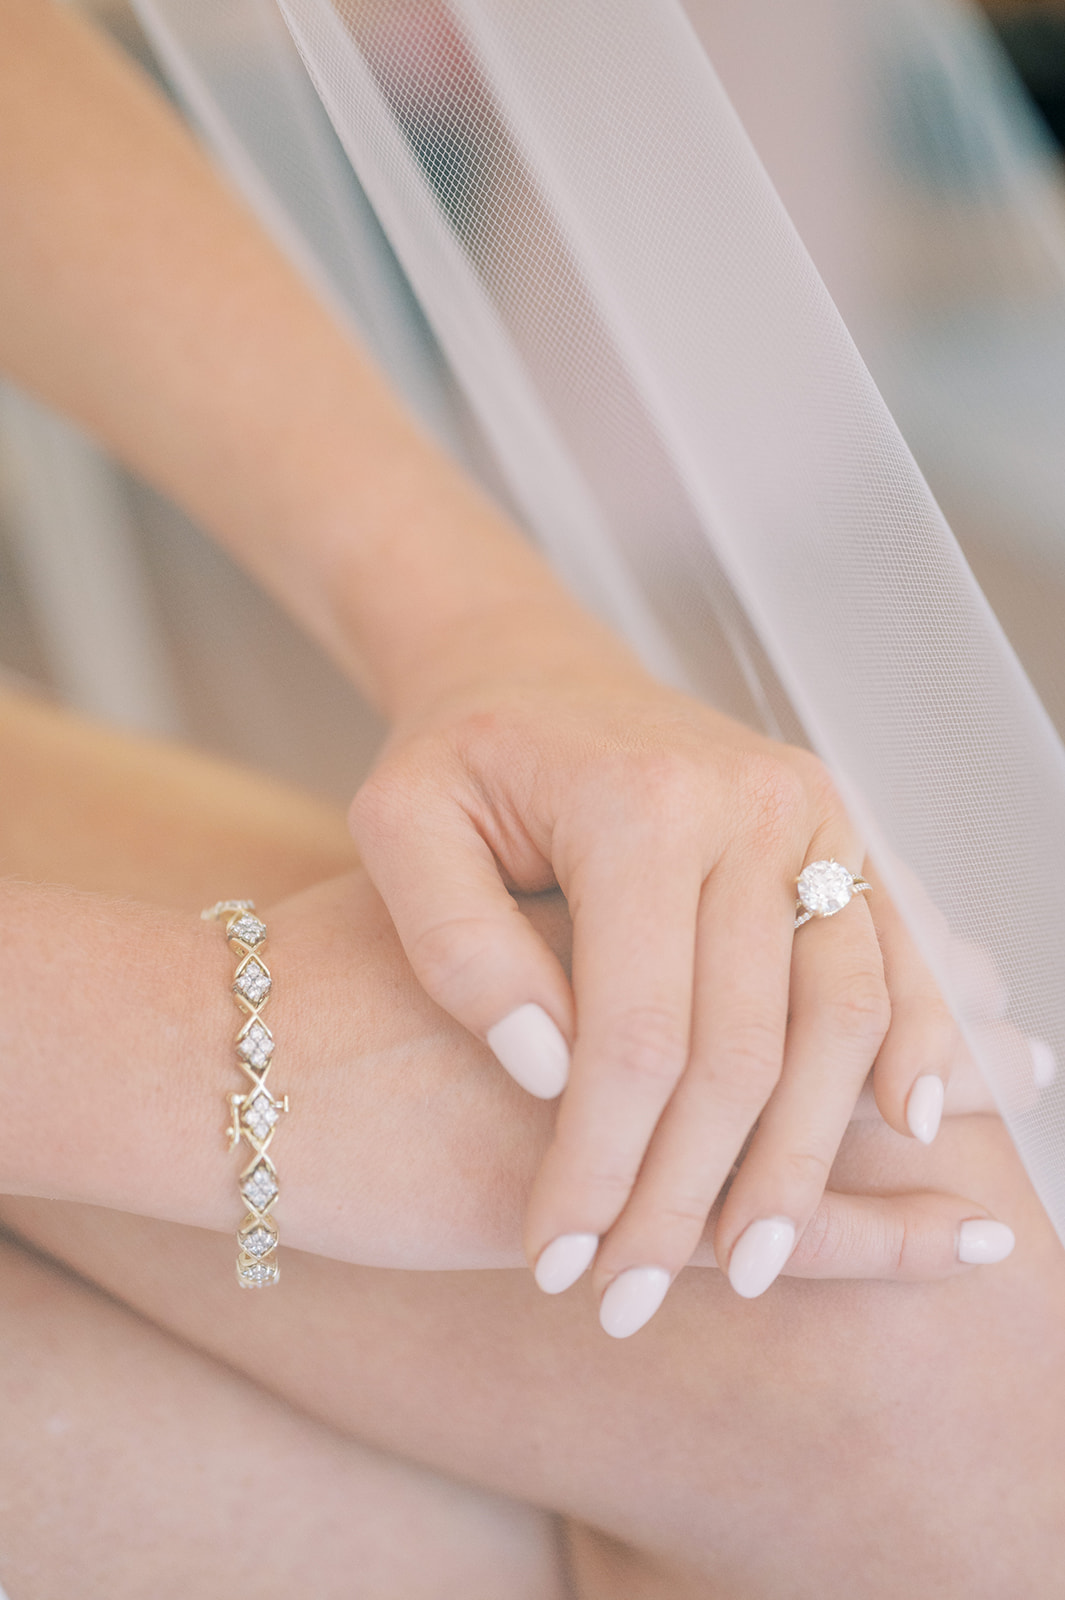 close photo of hands with engagement ring, bracelet, and pretty nails